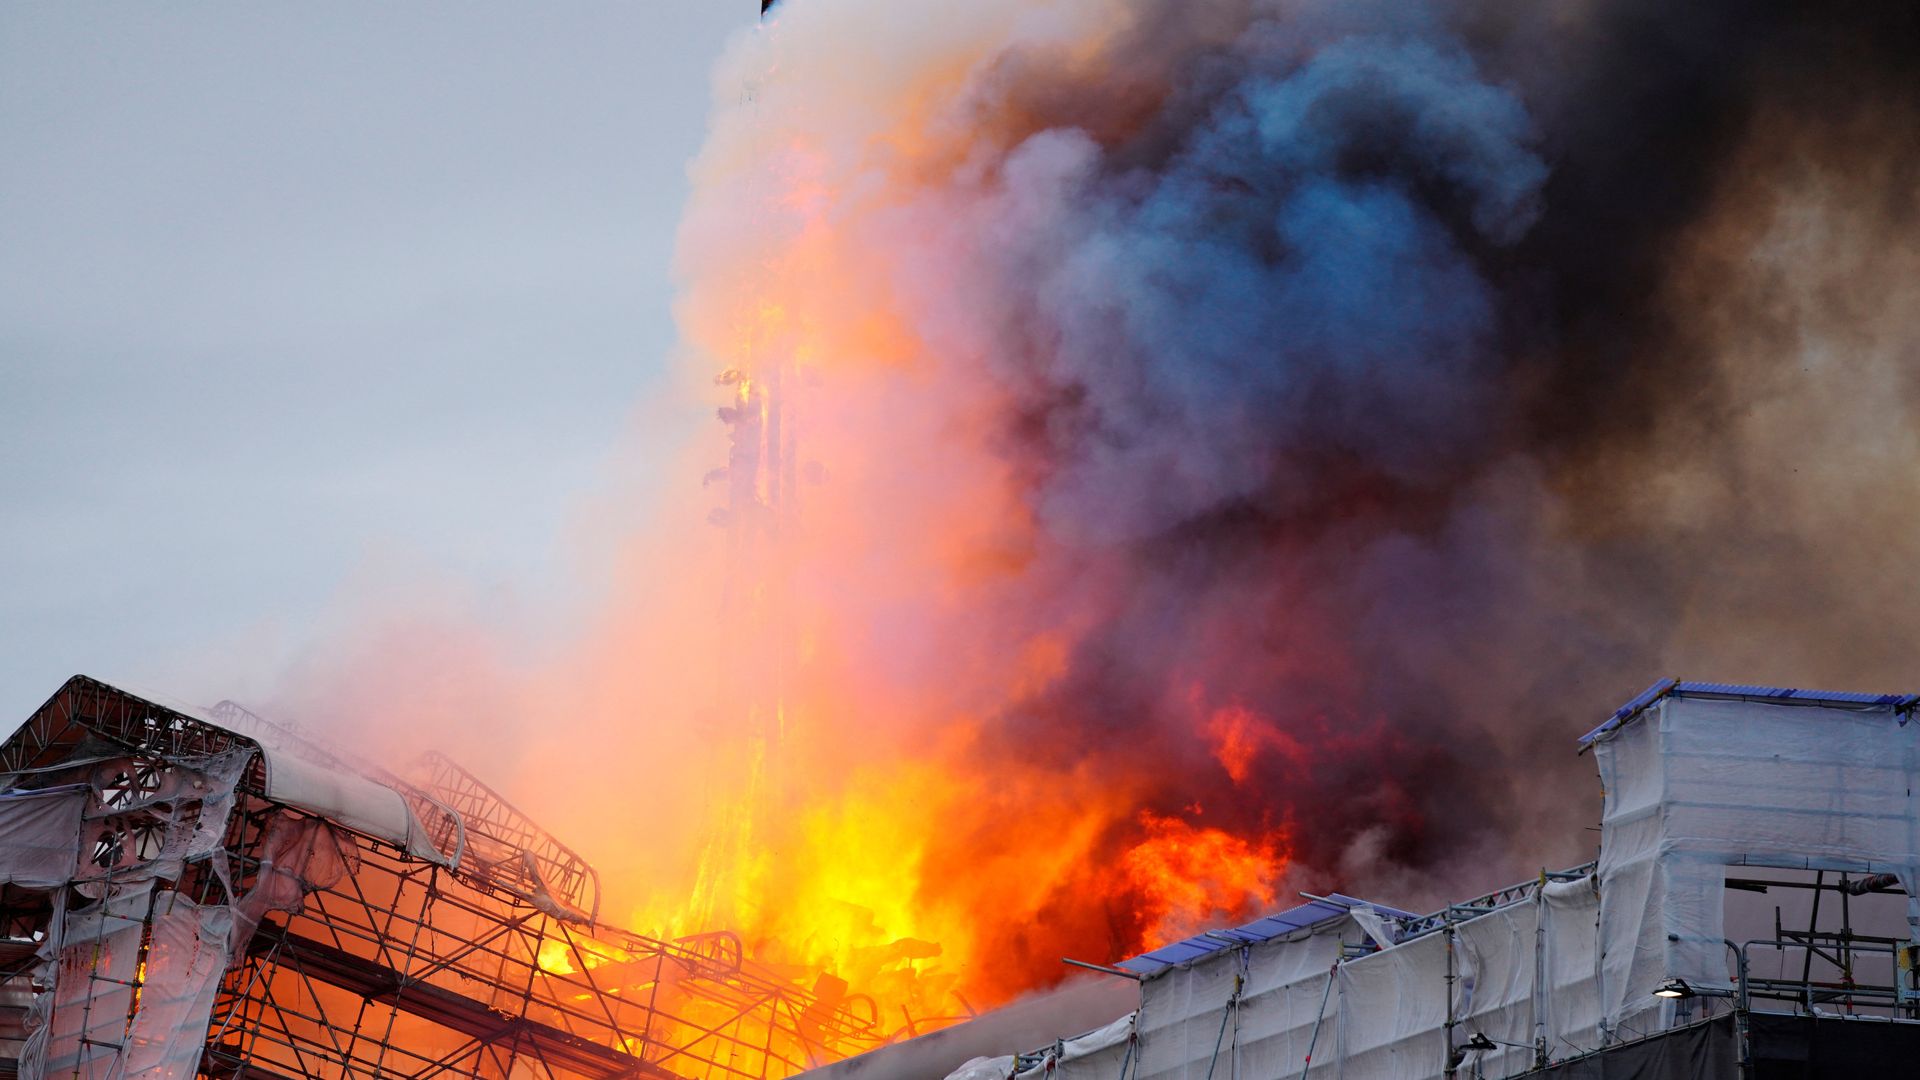 Fire breaks out at one of Copenhagen's oldest buildings - as spire collapses